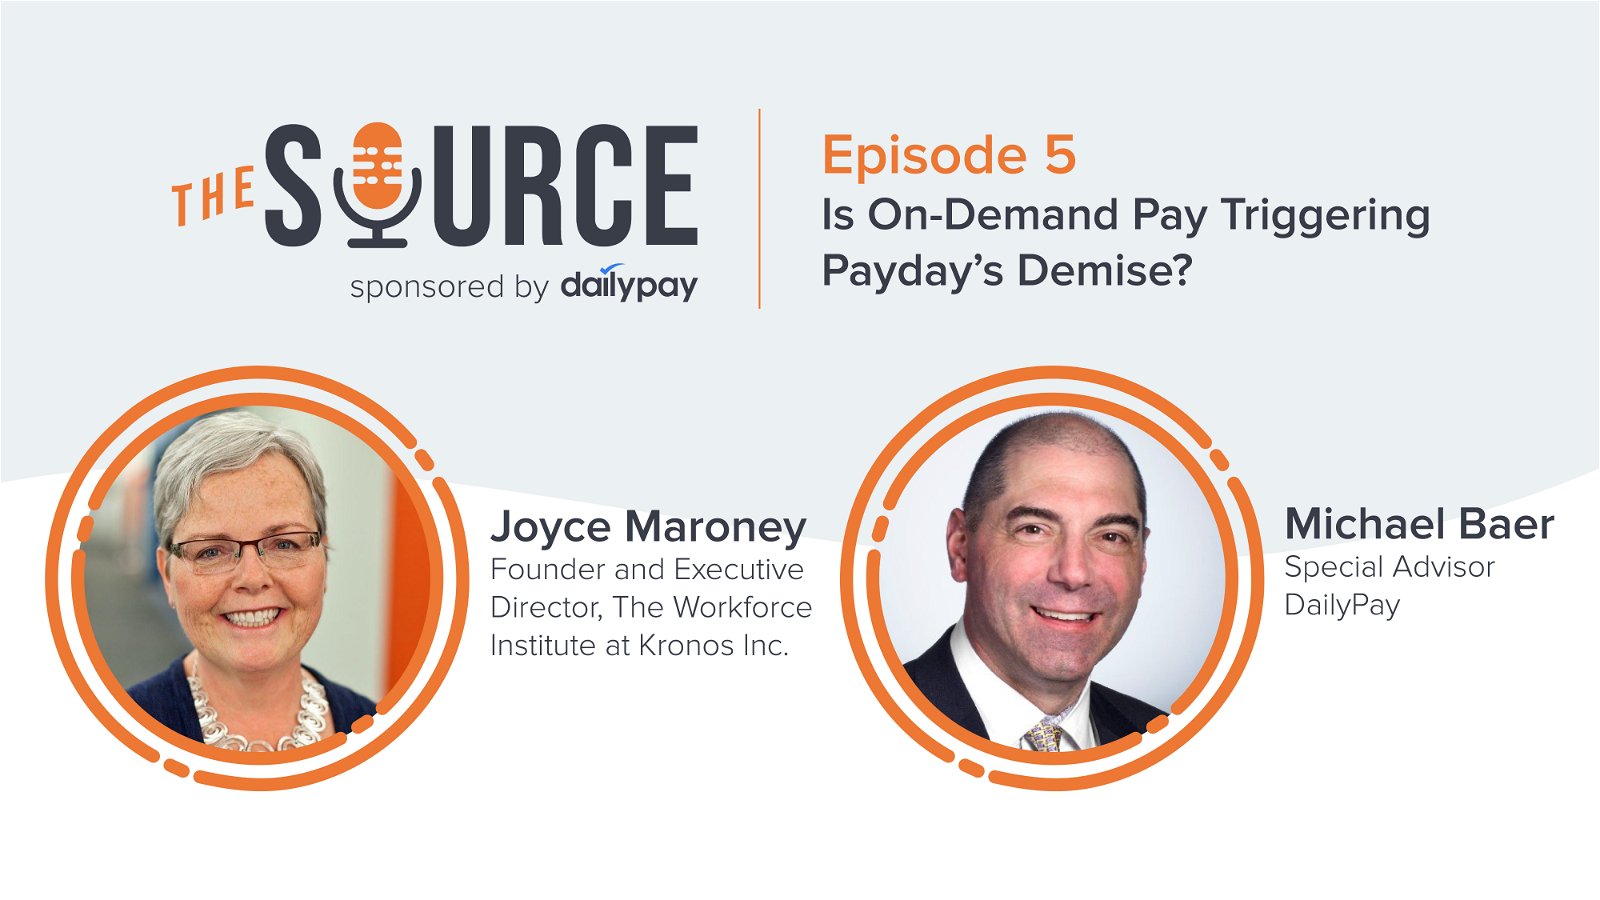 The Source Episode 5: Discussion on whether on-demand pay is affecting traditional payday, featuring Joyce Maroney, Founder and Executive Director at The Workforce Institute at Kronos Inc., and Michael Baer, Special Advisor at DailyPay.”.